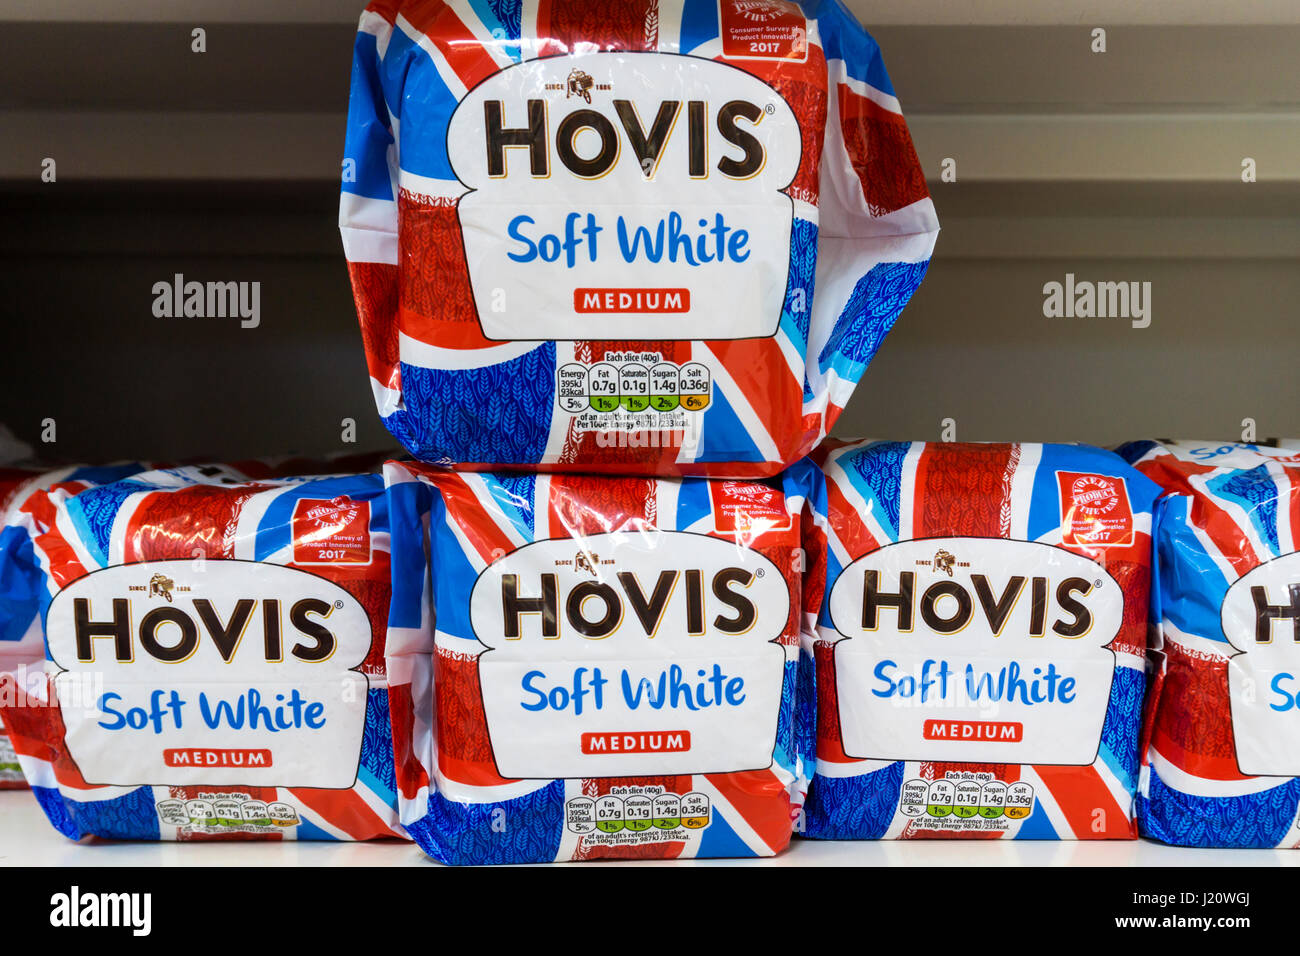 Loaves of Hovis Medium Sliced Soft White bread for sale on a supermarket shelf, in Union Jack themed wrapping. Stock Photo